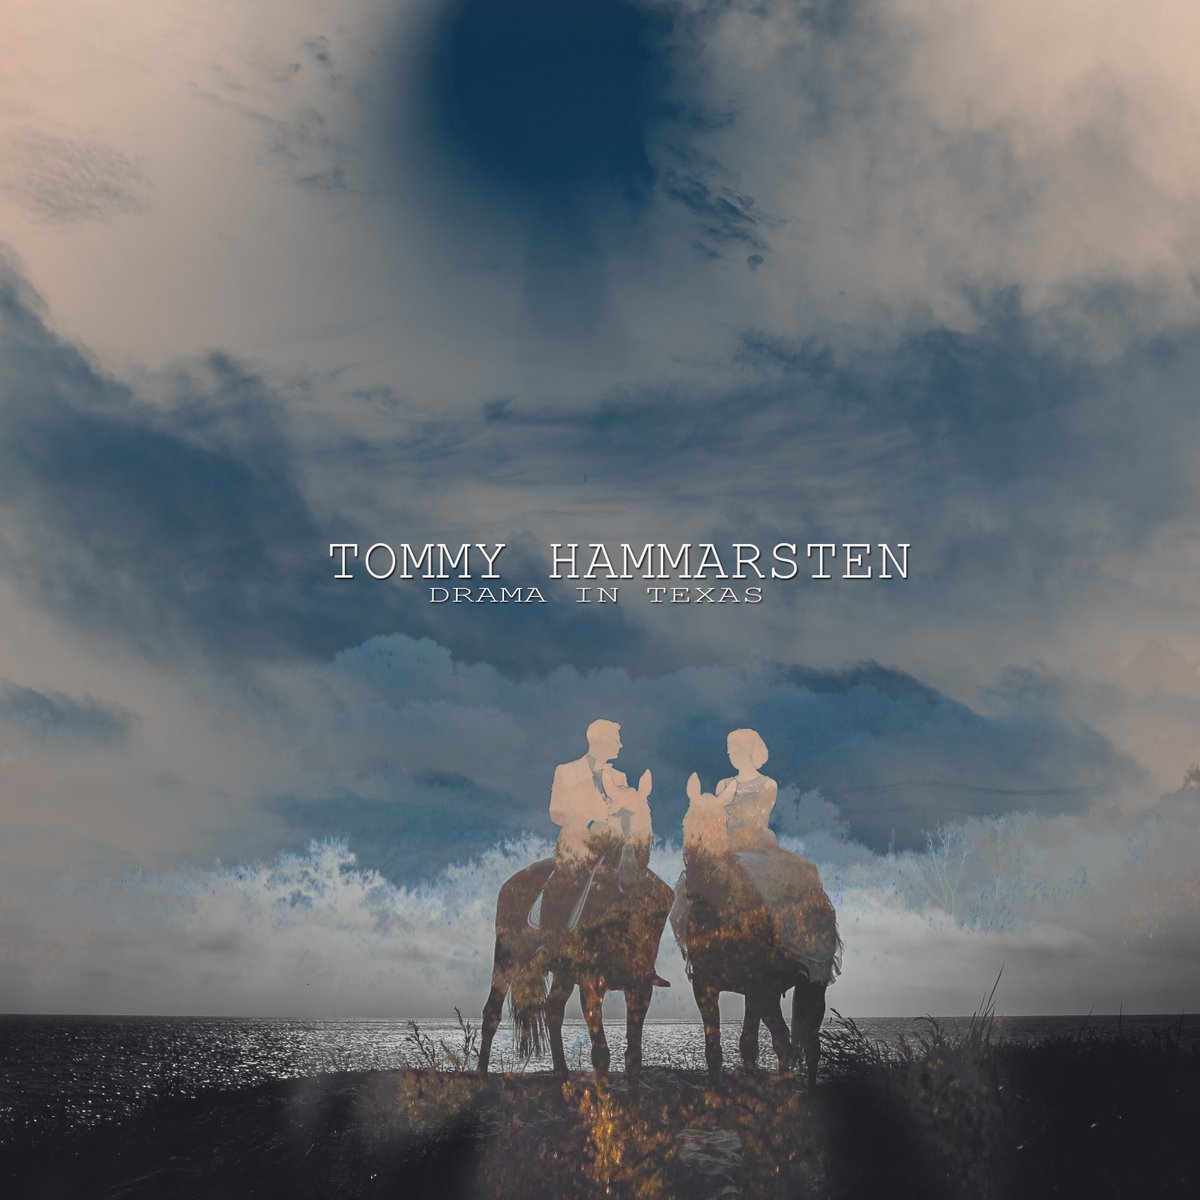 soon full album by Tommy Hammarsten
all about love, music,song ,lyrics by tommy

#lovesong #love #music #song #lovesongs #tamilsong #singer #tamilbgm  #tamil #status #trending #whatsappstatus #instagram #instagood  #thalapathy #bollywood #songs #lovestatus
open.spotify.com/artist/1lRh9cZ…